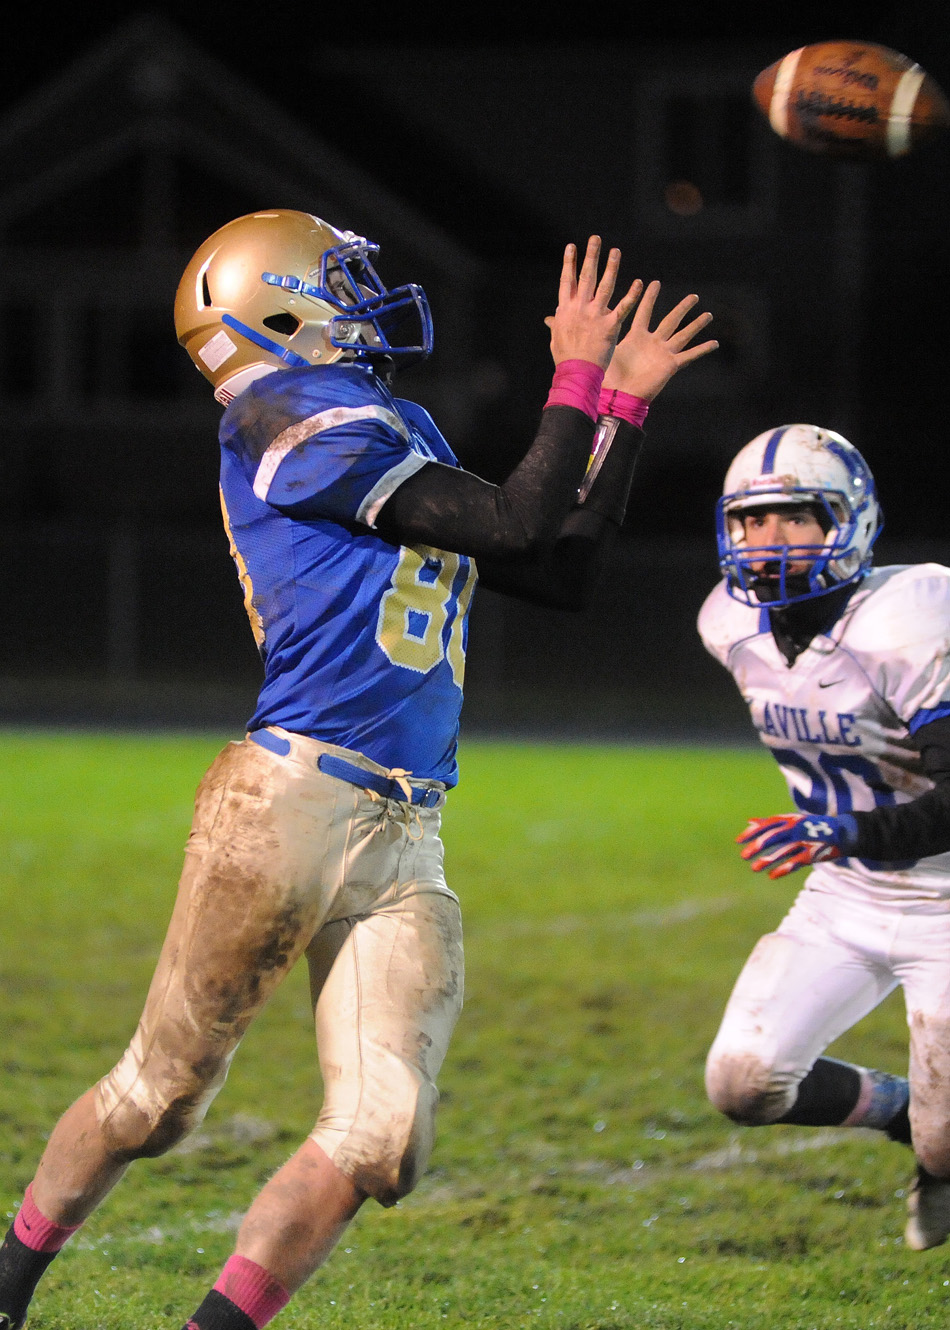 Triton wide receiver Tristan Hunsberger hauls in a catch, one of just four completions by either team all night.